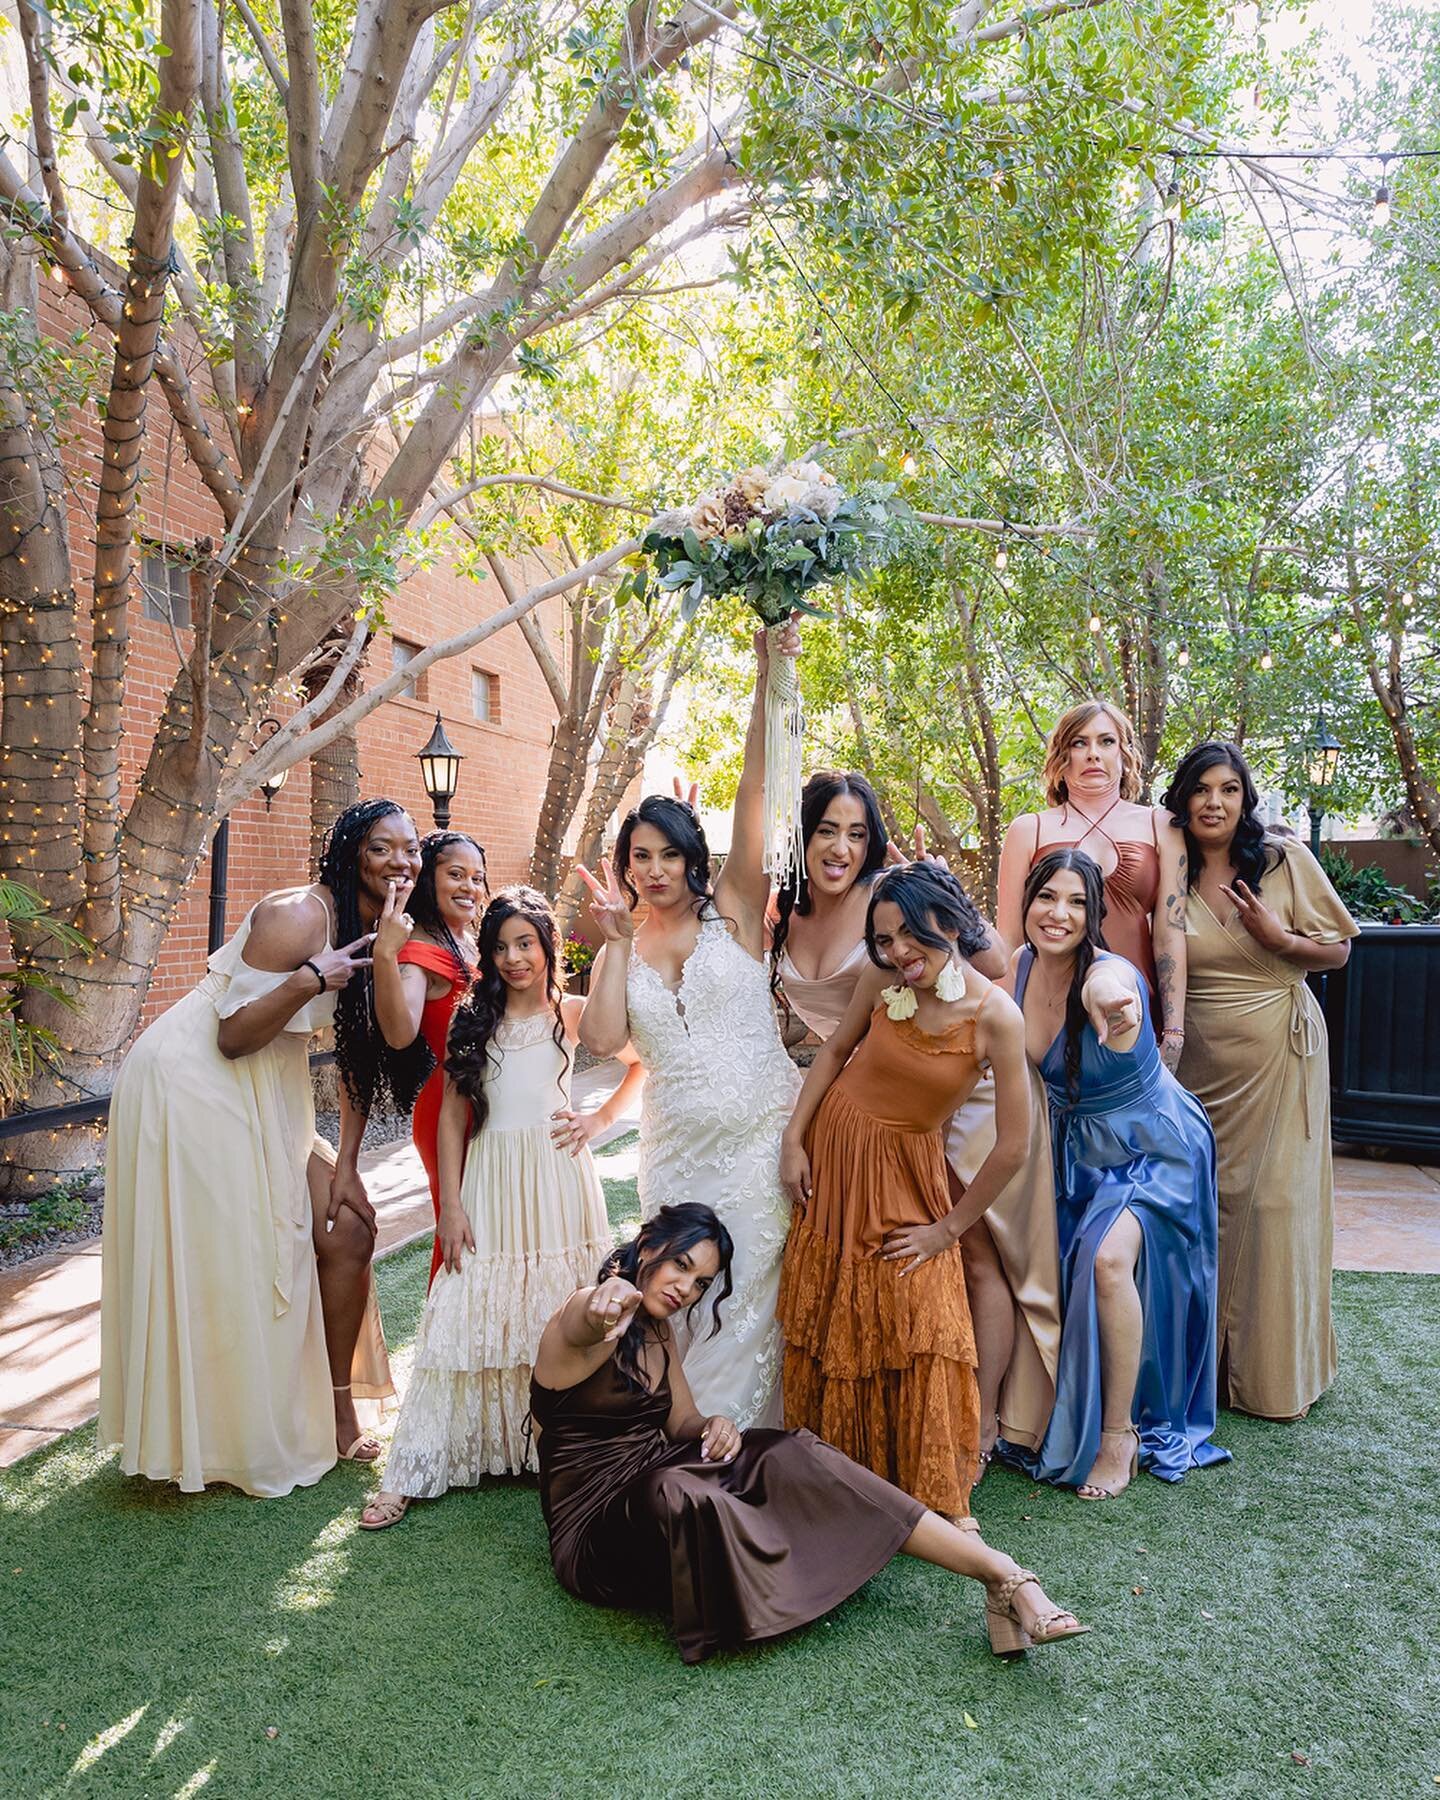 Scroll to watch this wedding party PAR-TAY! And GET THAT PHOTO SPECIAL before it ends. Hit Profile Link, Tap 1st button to learn all about our photography services and how you can book us at an awesome discount for your Spring Wedding! Tell your newl